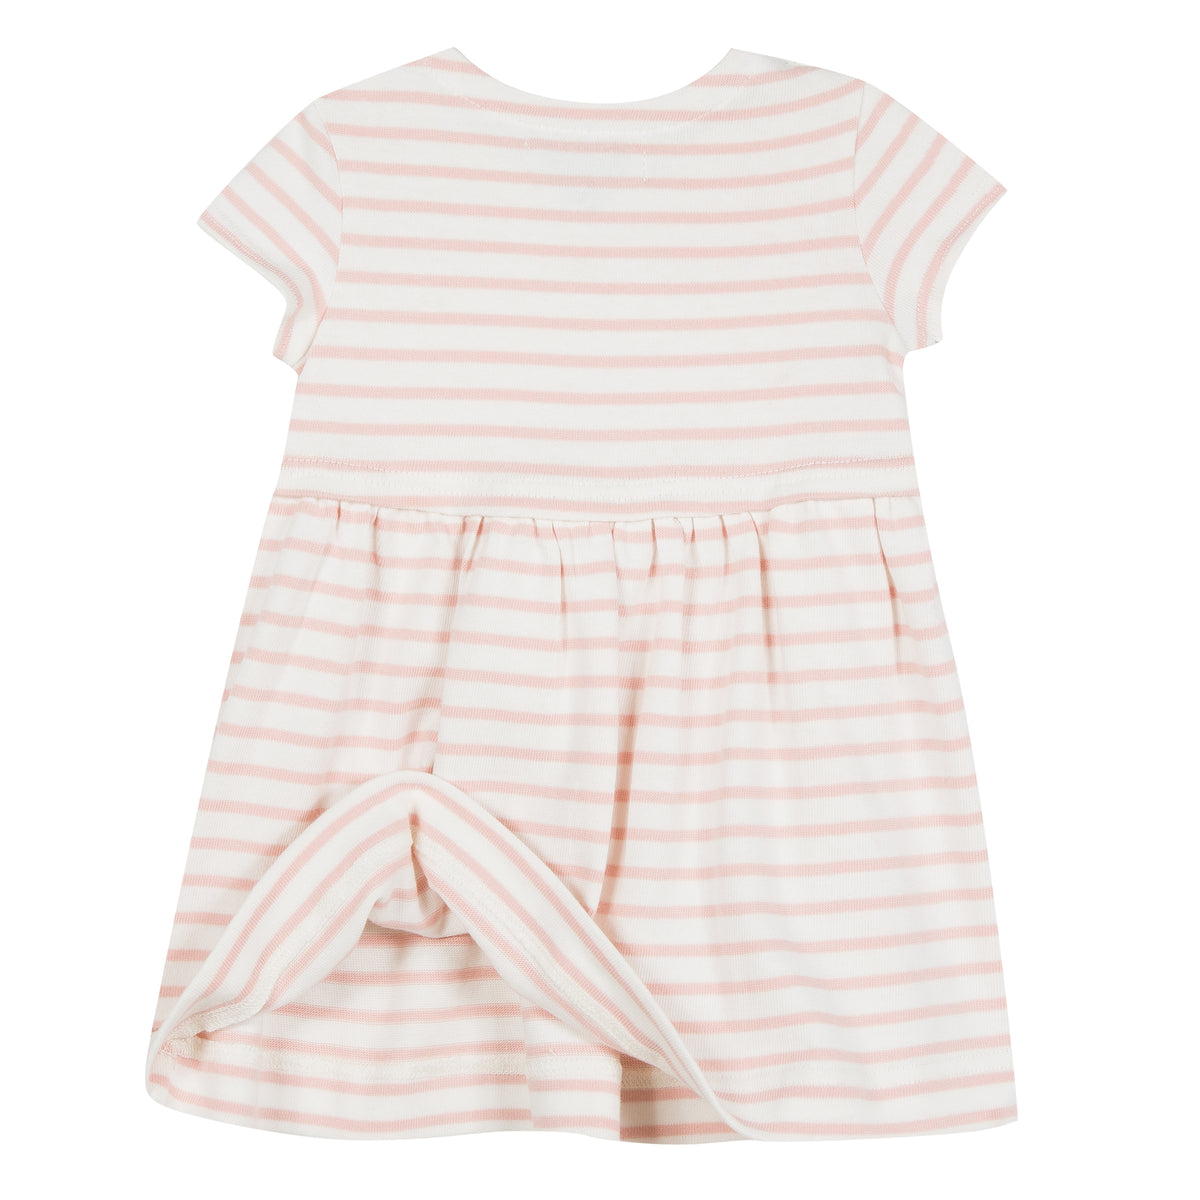 Tenderly striped with pale pink, this dress in heavy cotton jersey. Animated with folds on the skirt and a breast pocket, deigned by Jean Bourget.